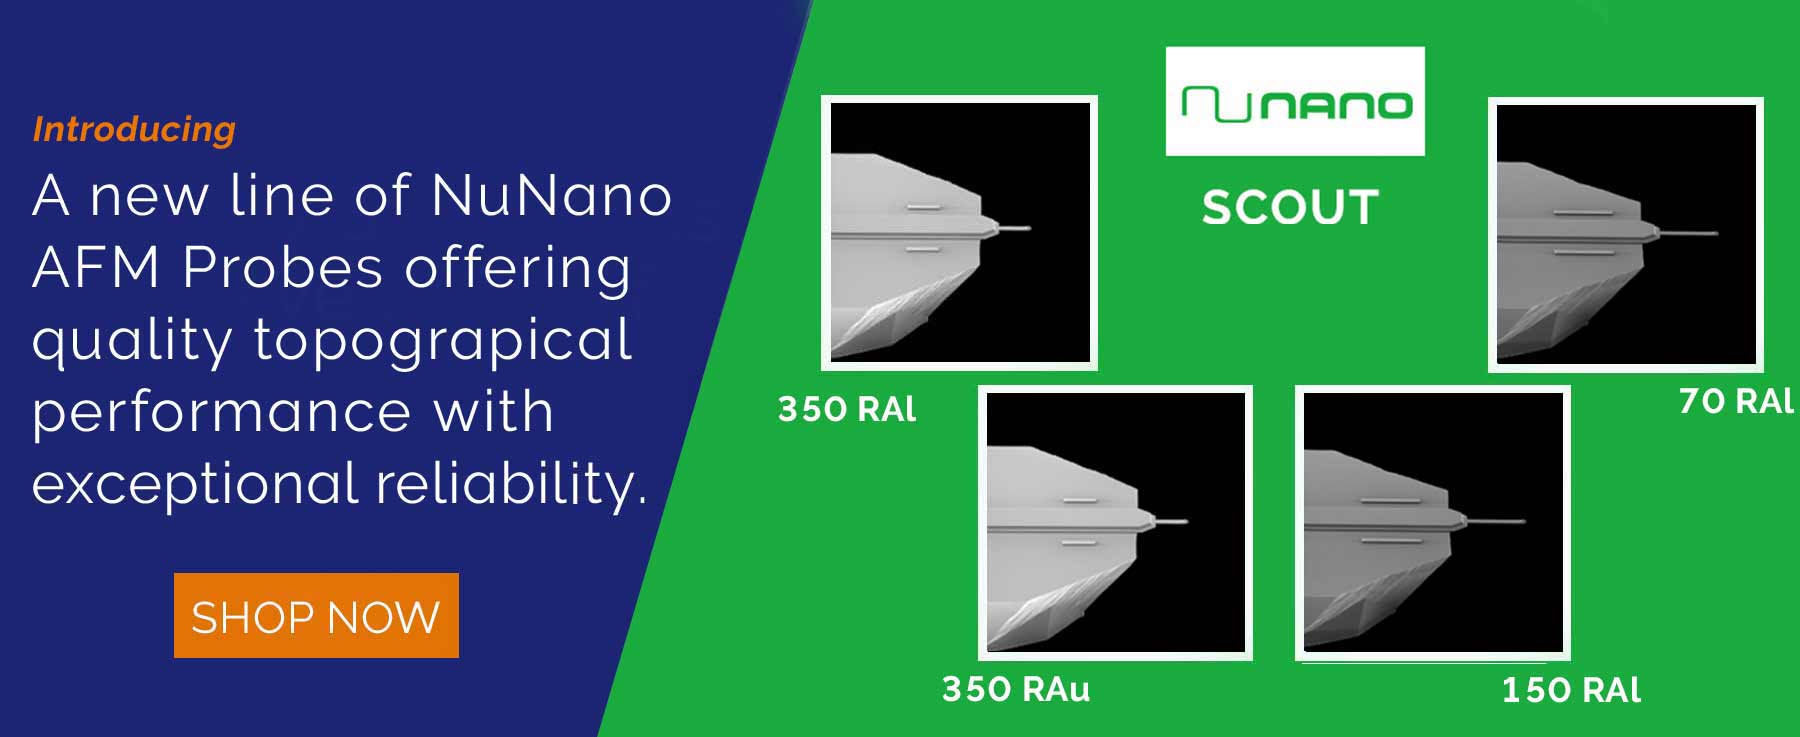 Introducing a new line of NuNano AFM Probes offering quality Nanoelectrical performance...